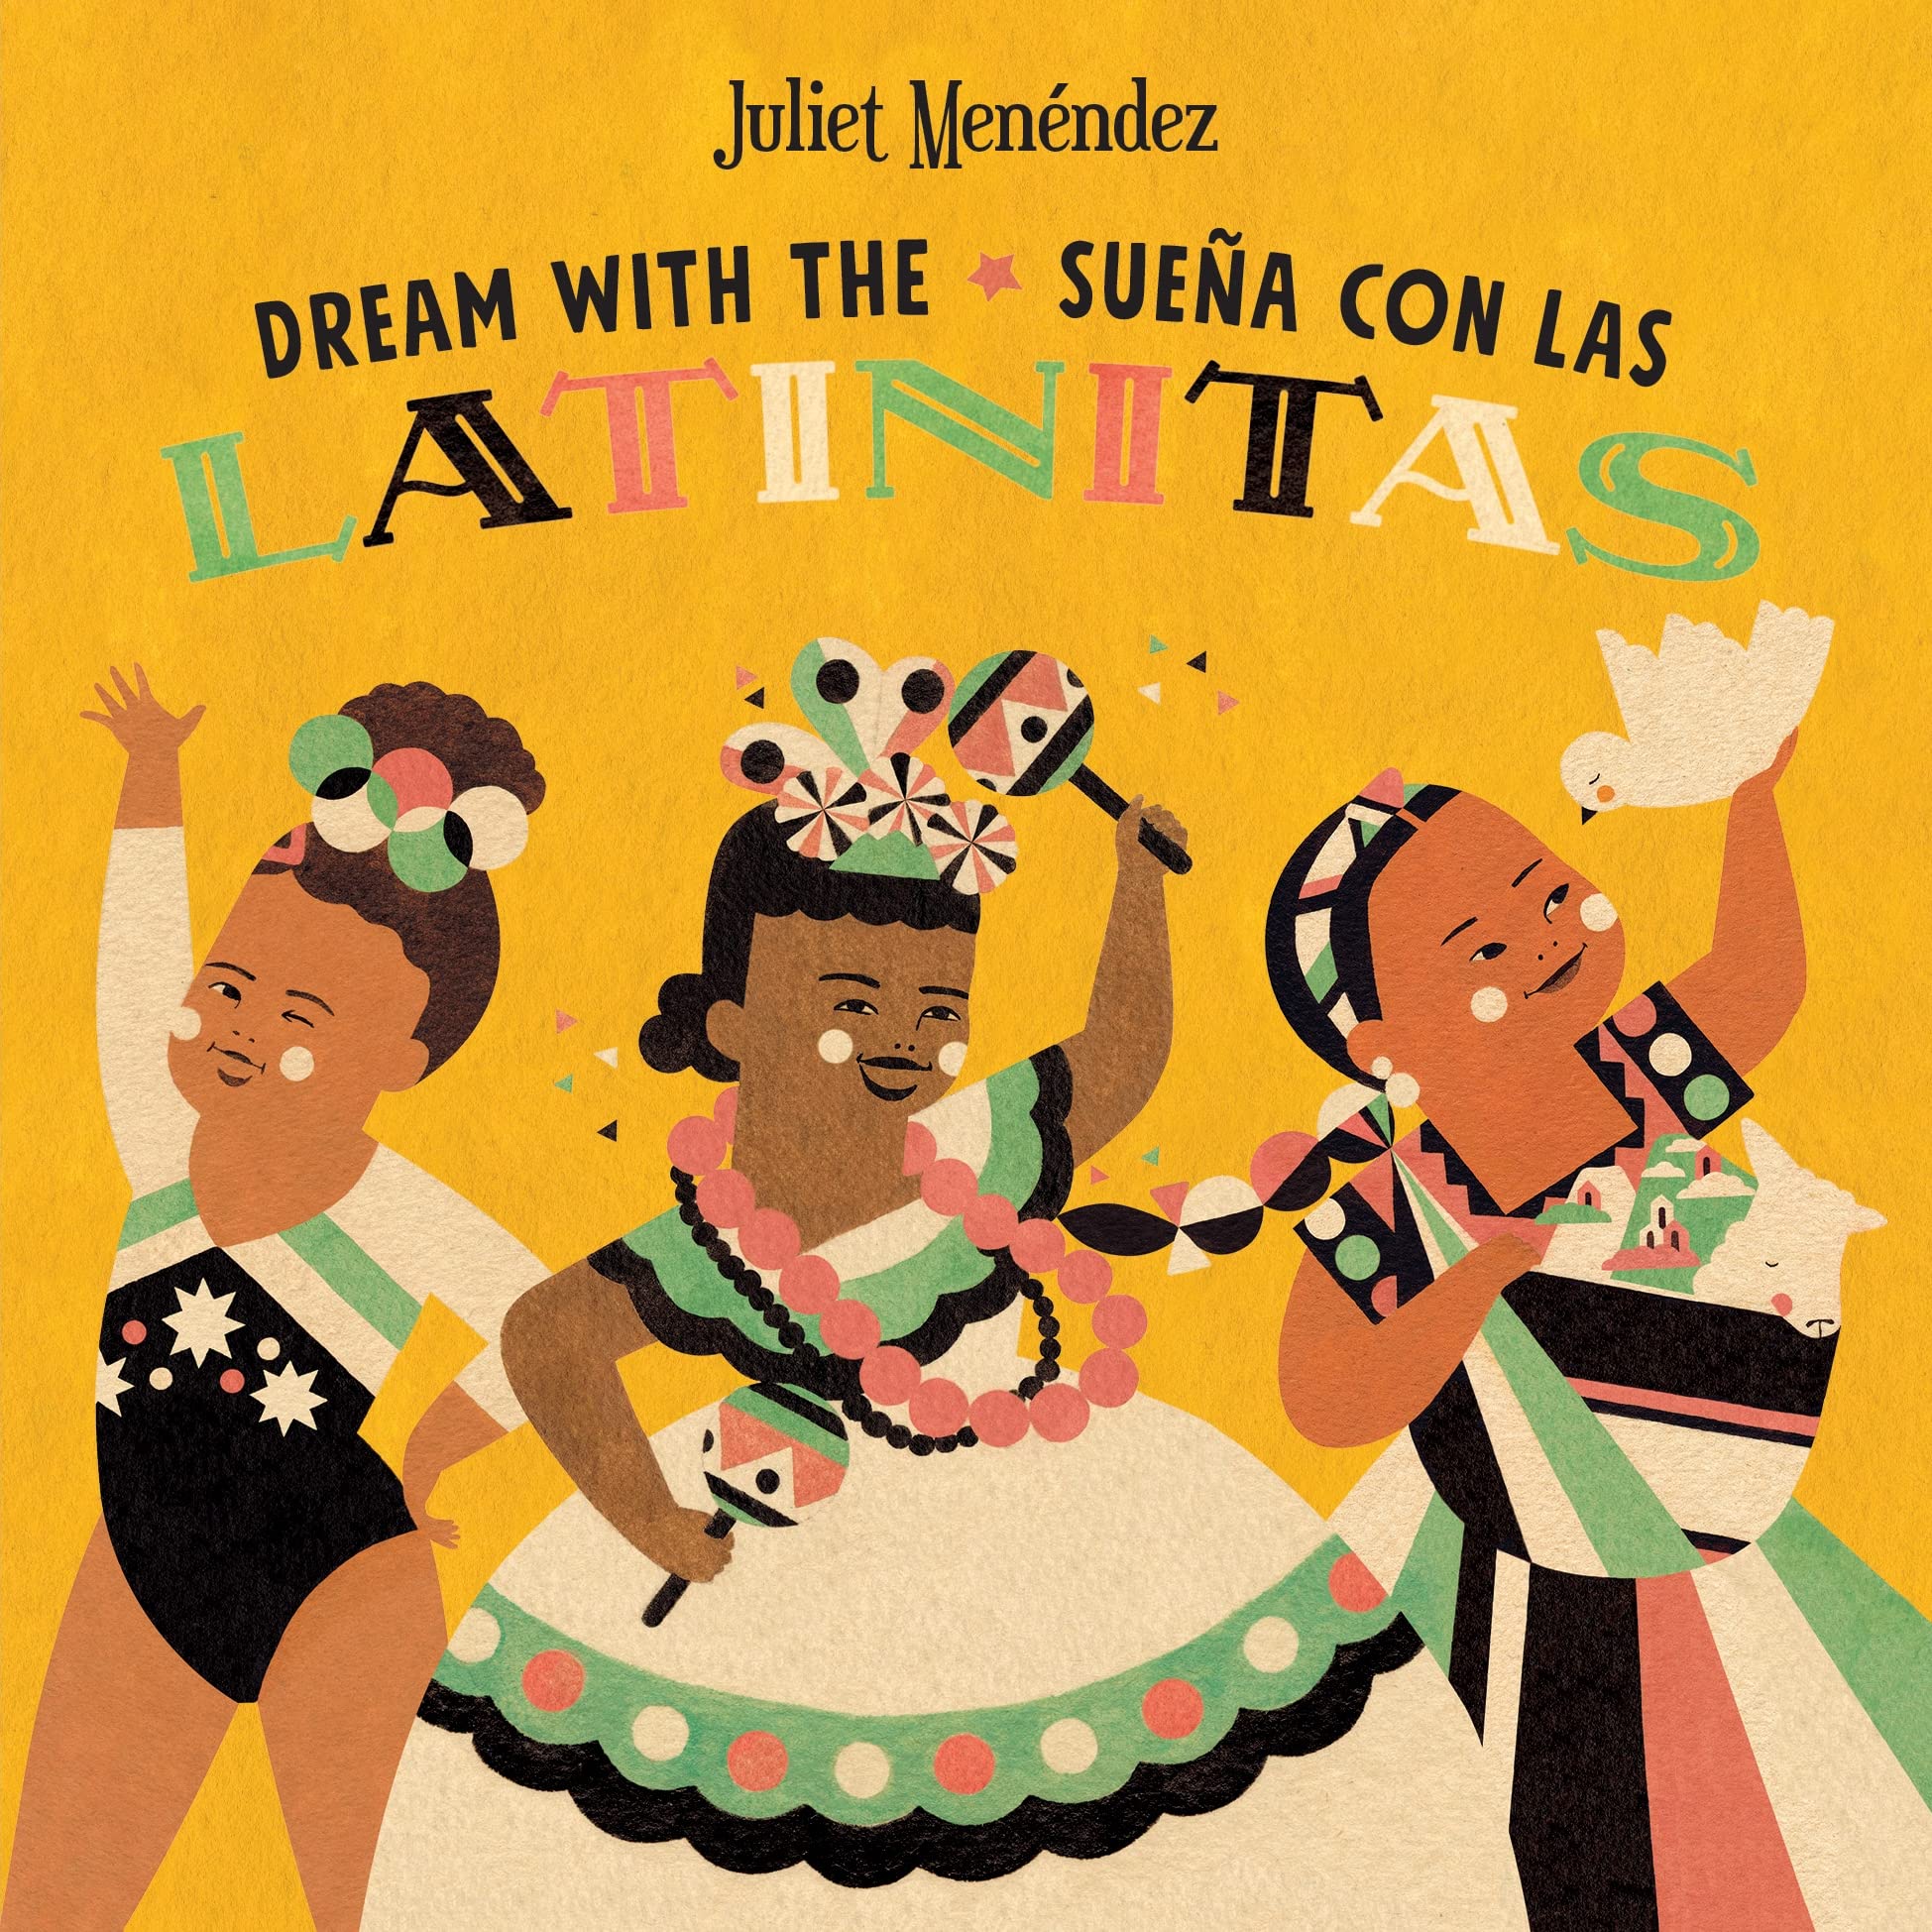 Dream with the Latinitas by Juliet Menéndez